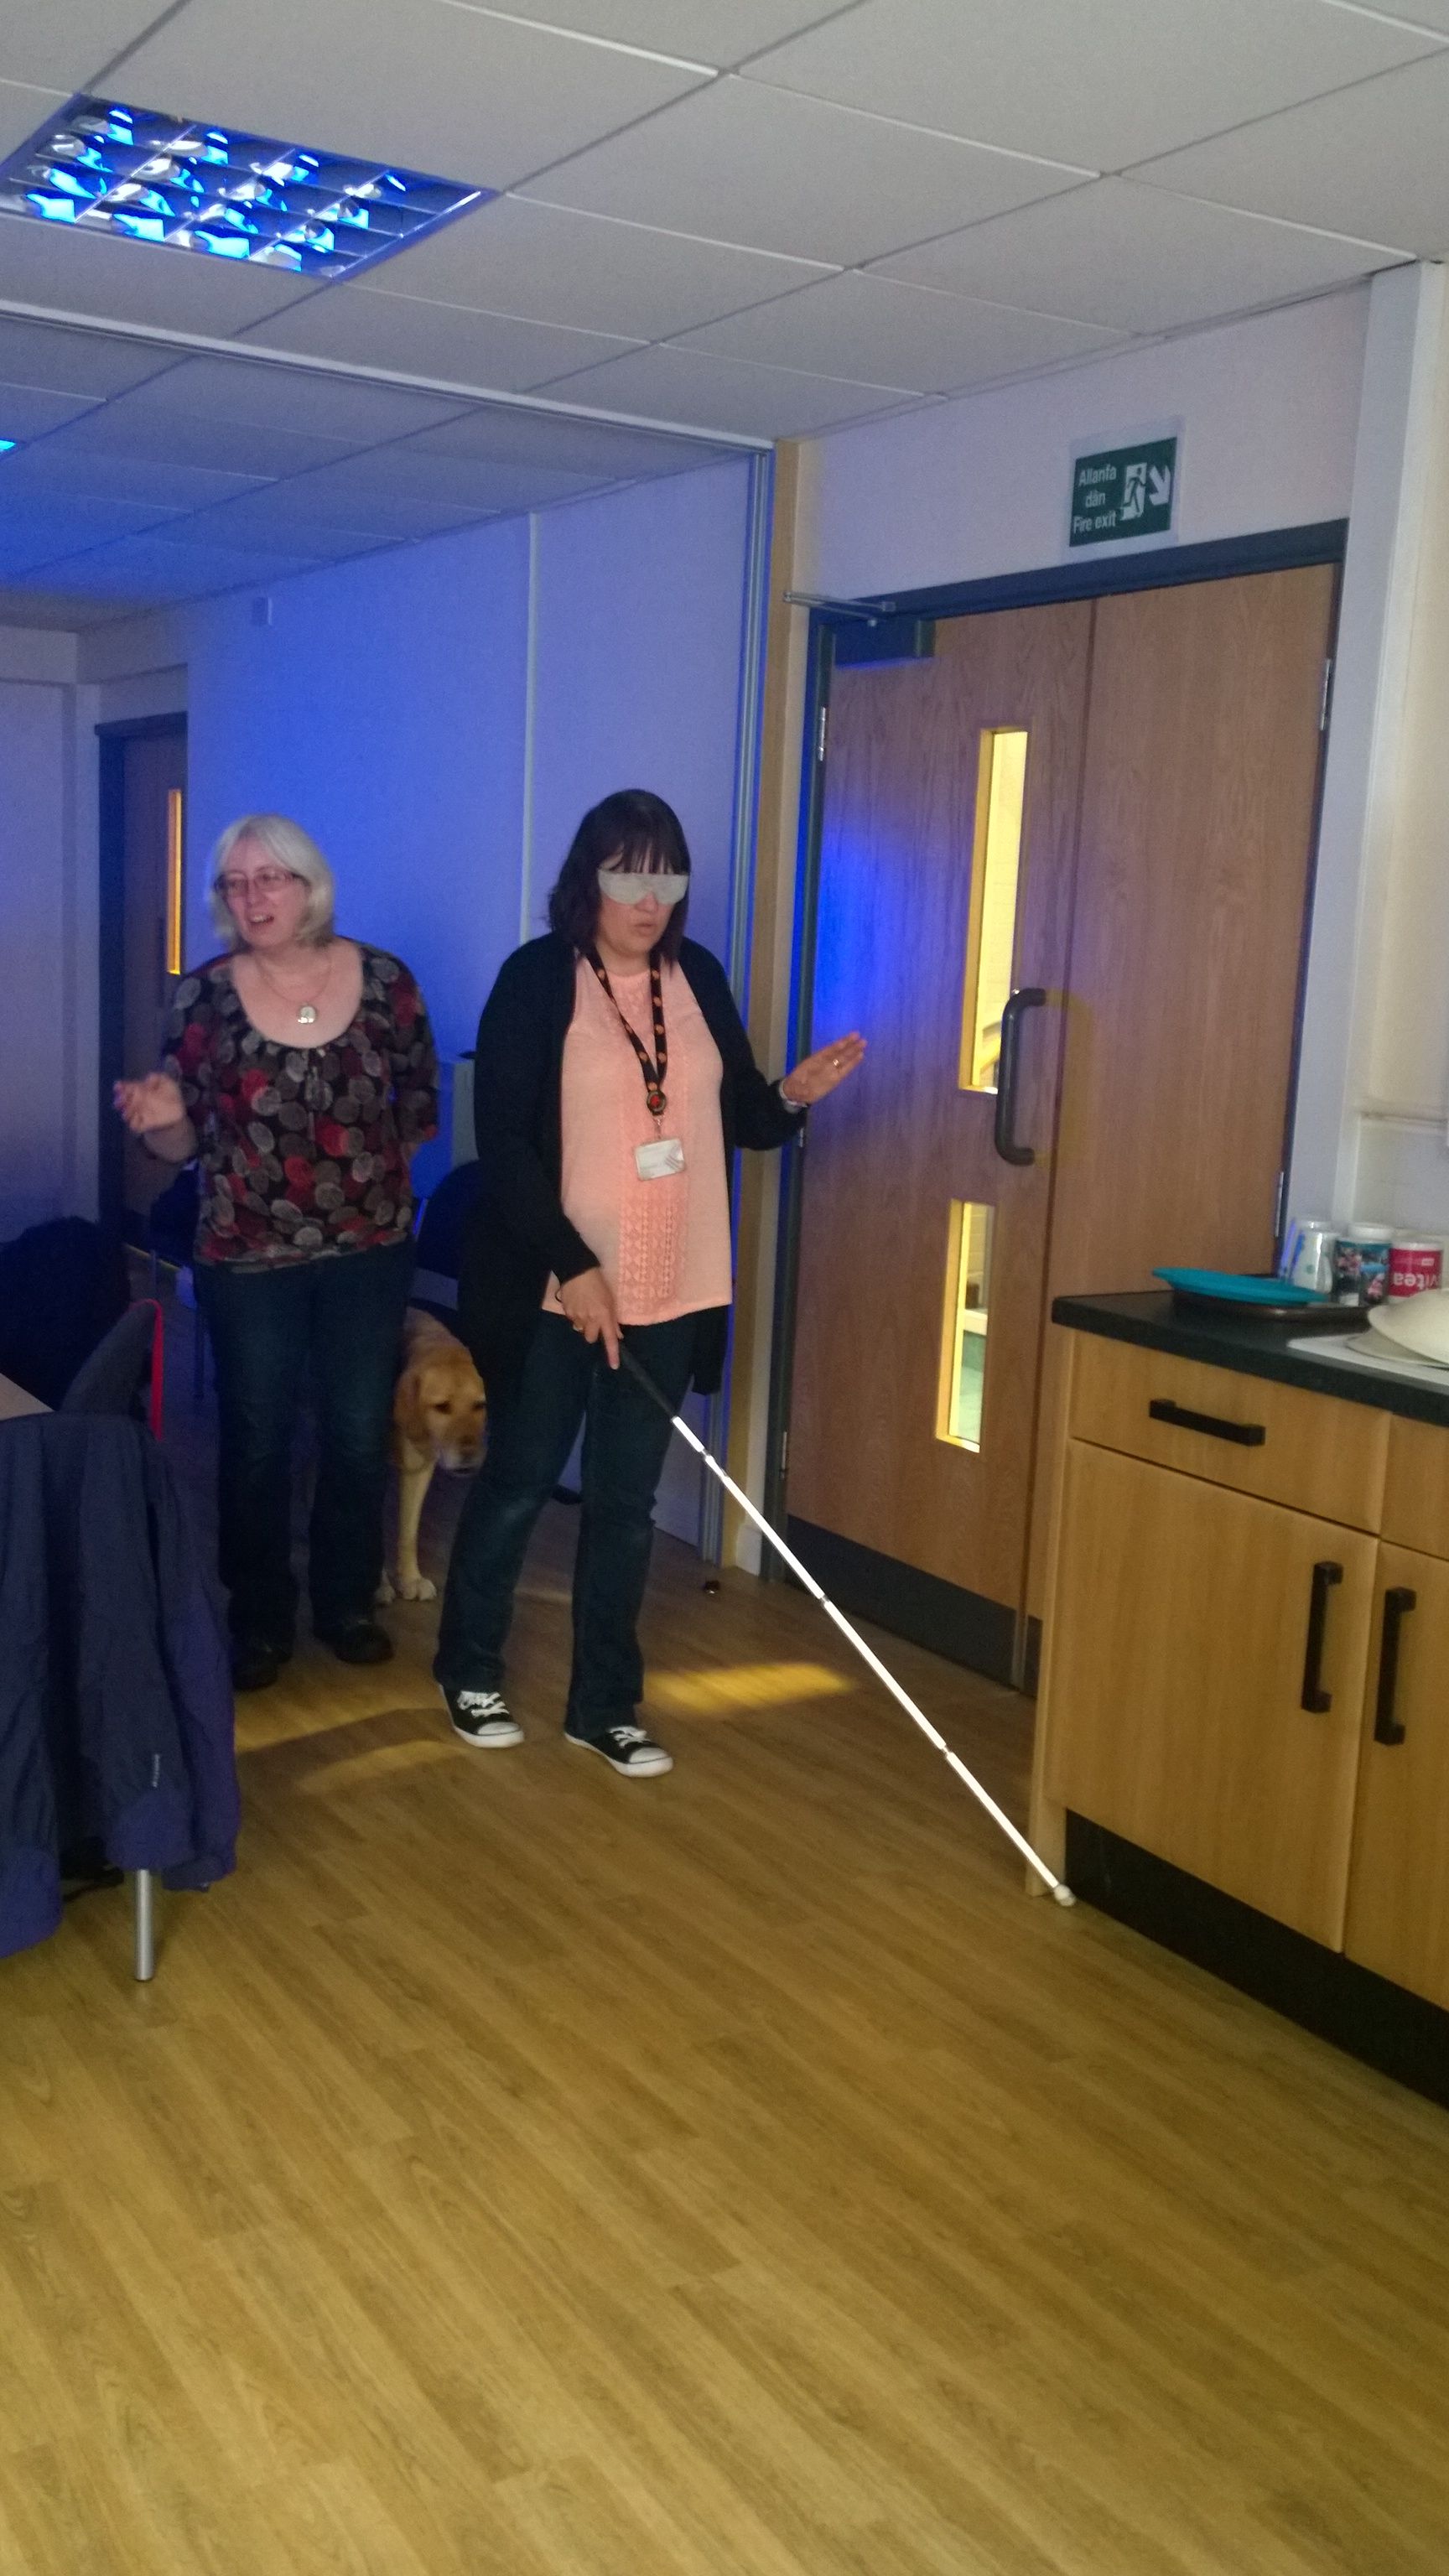 A female member of Museum staff, blindfolded and using a cane to walk around the office